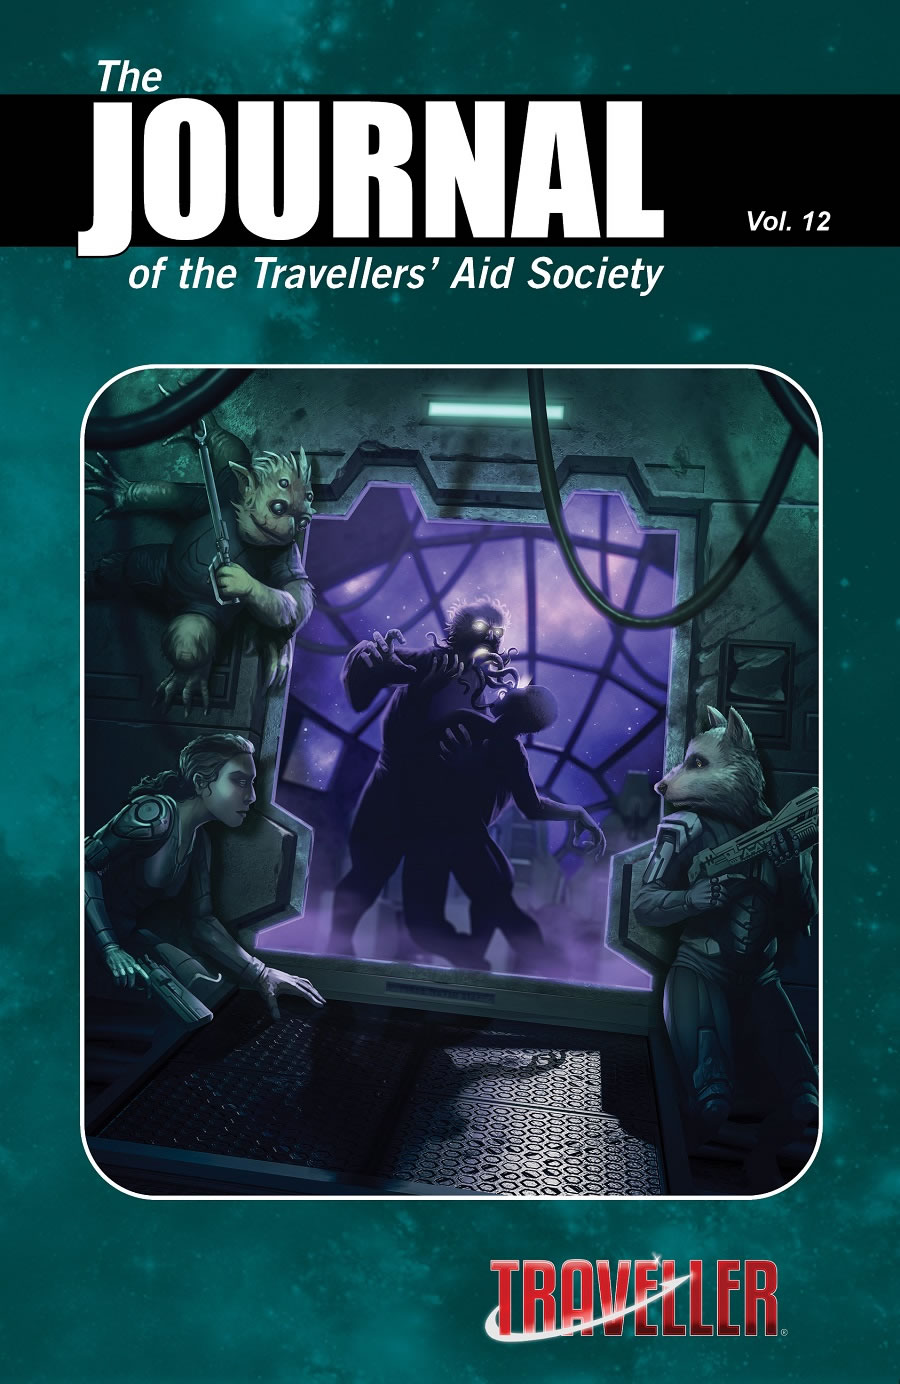 The Journal of Travellers Aid Society Vol.12 